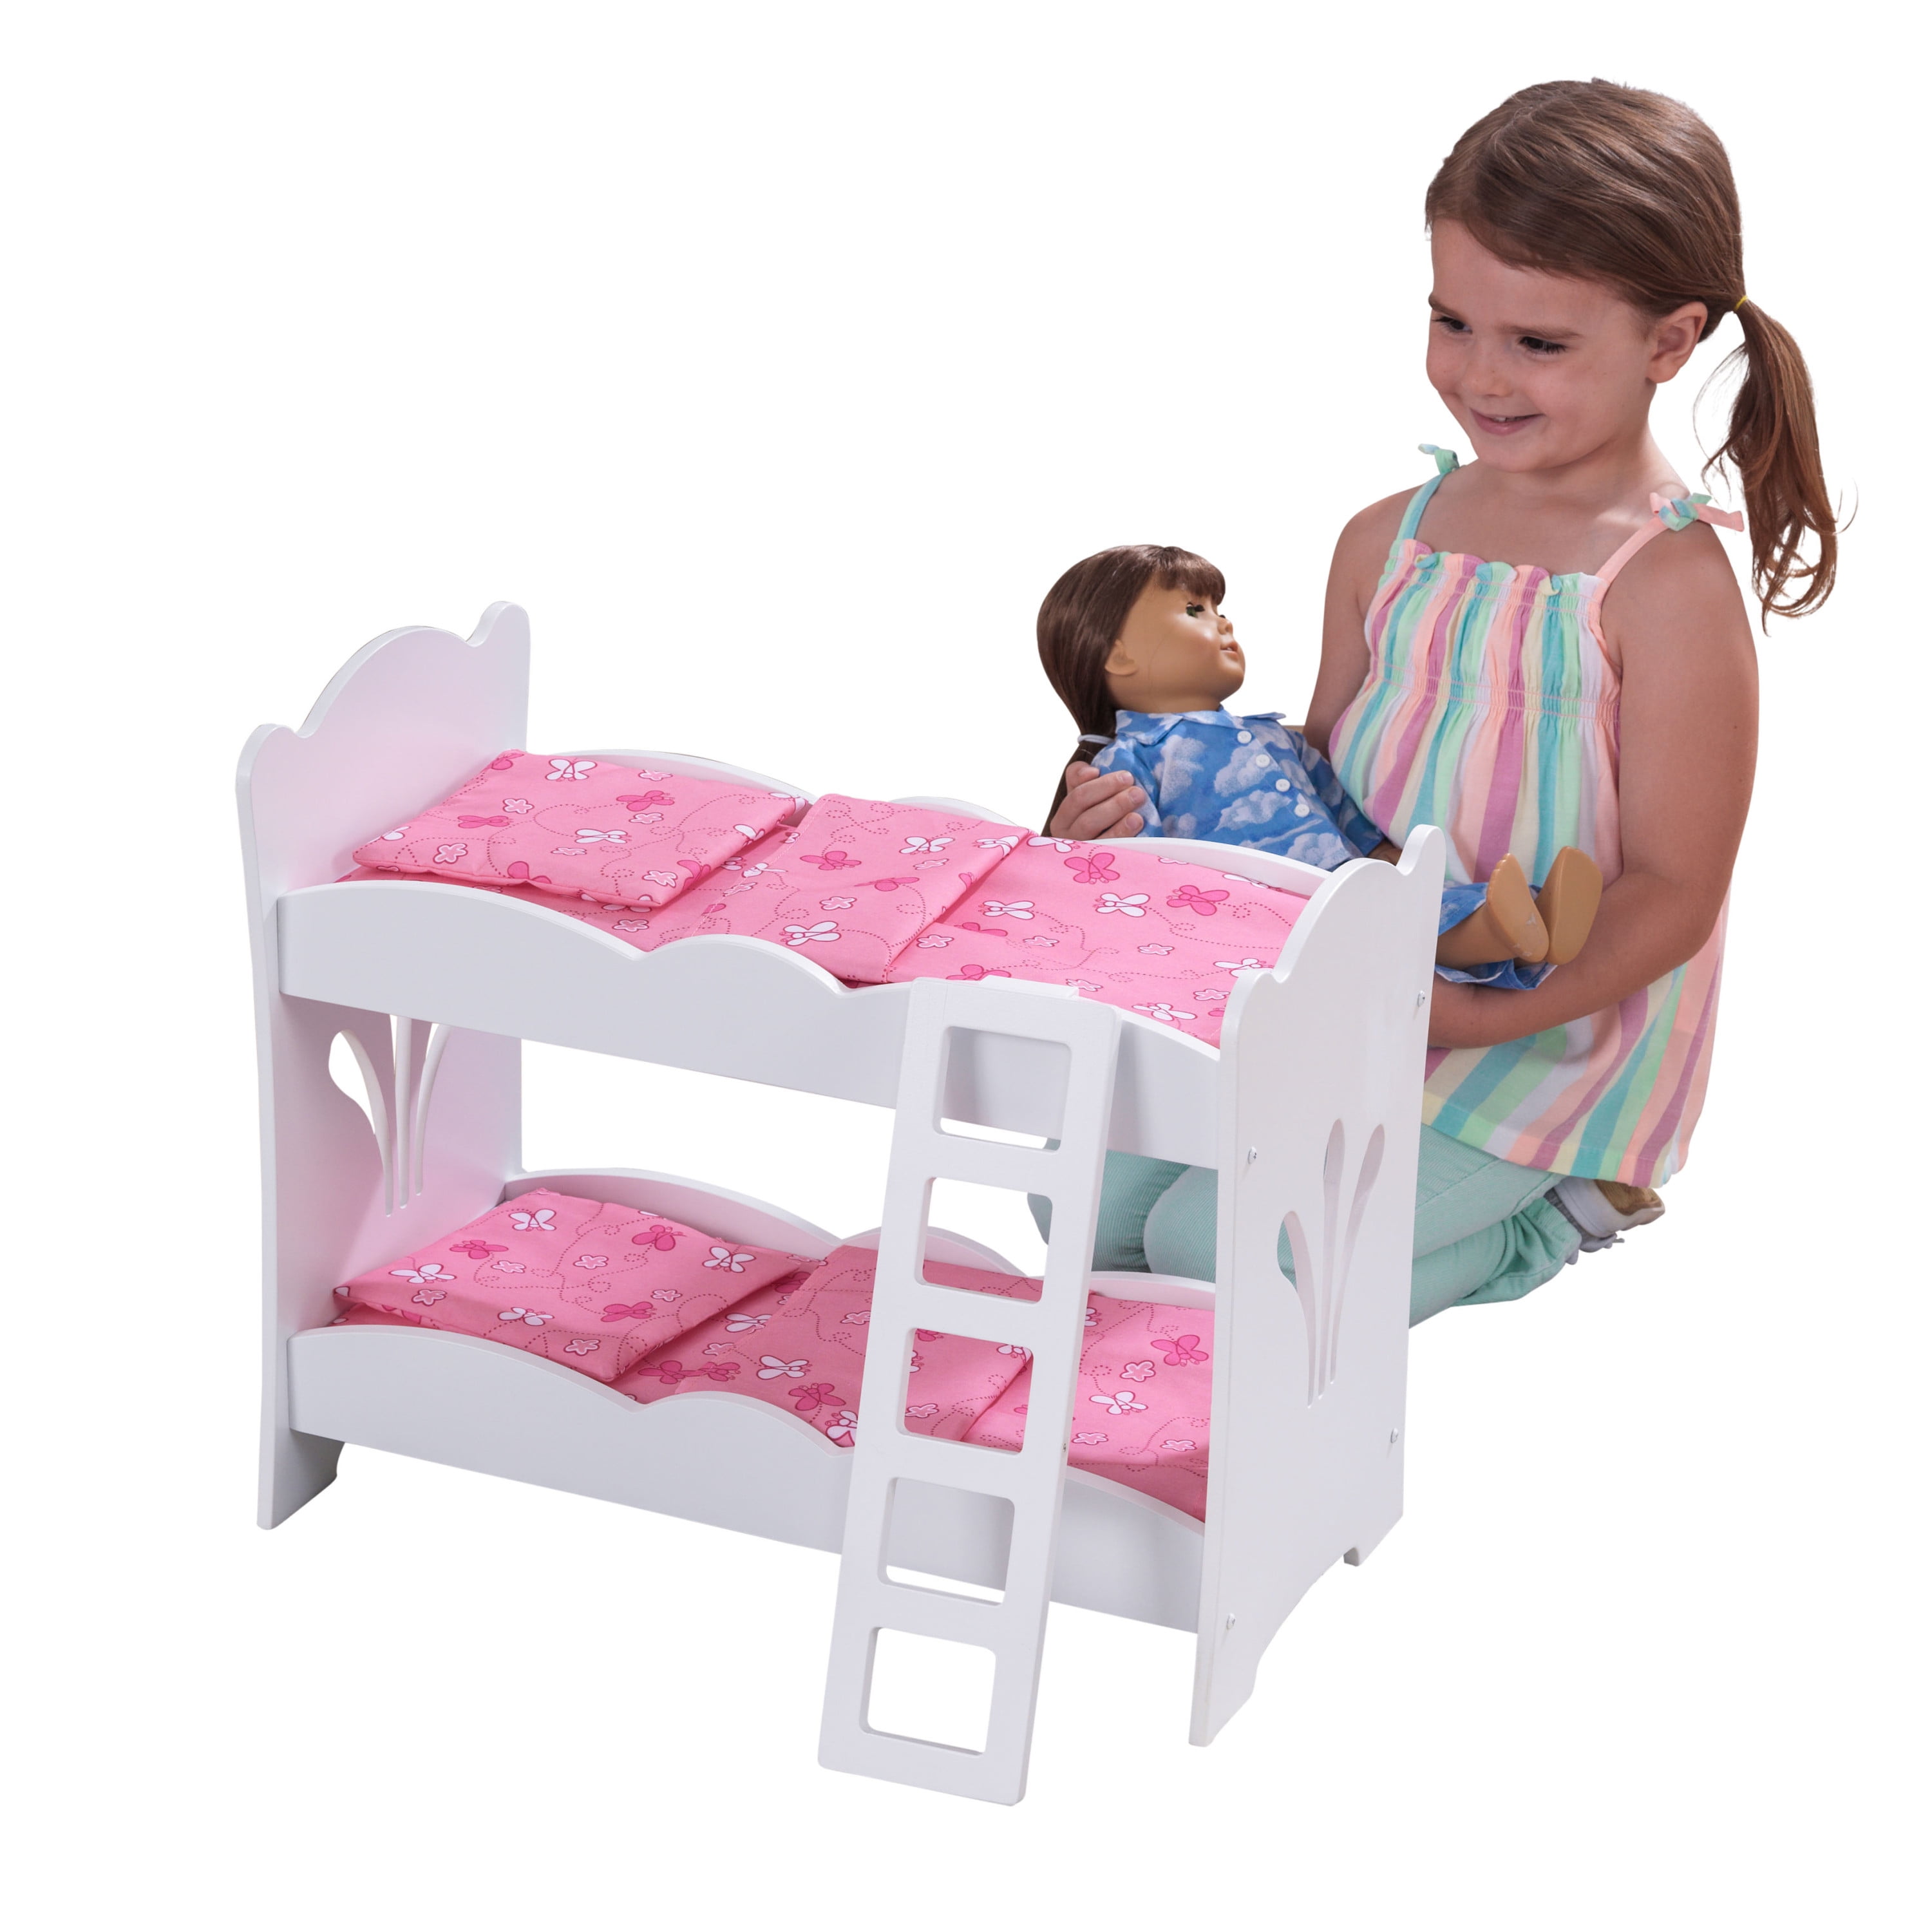 Kidkraft Wooden Lil Doll Bunk Bed With, Wooden Doll Bunk Beds